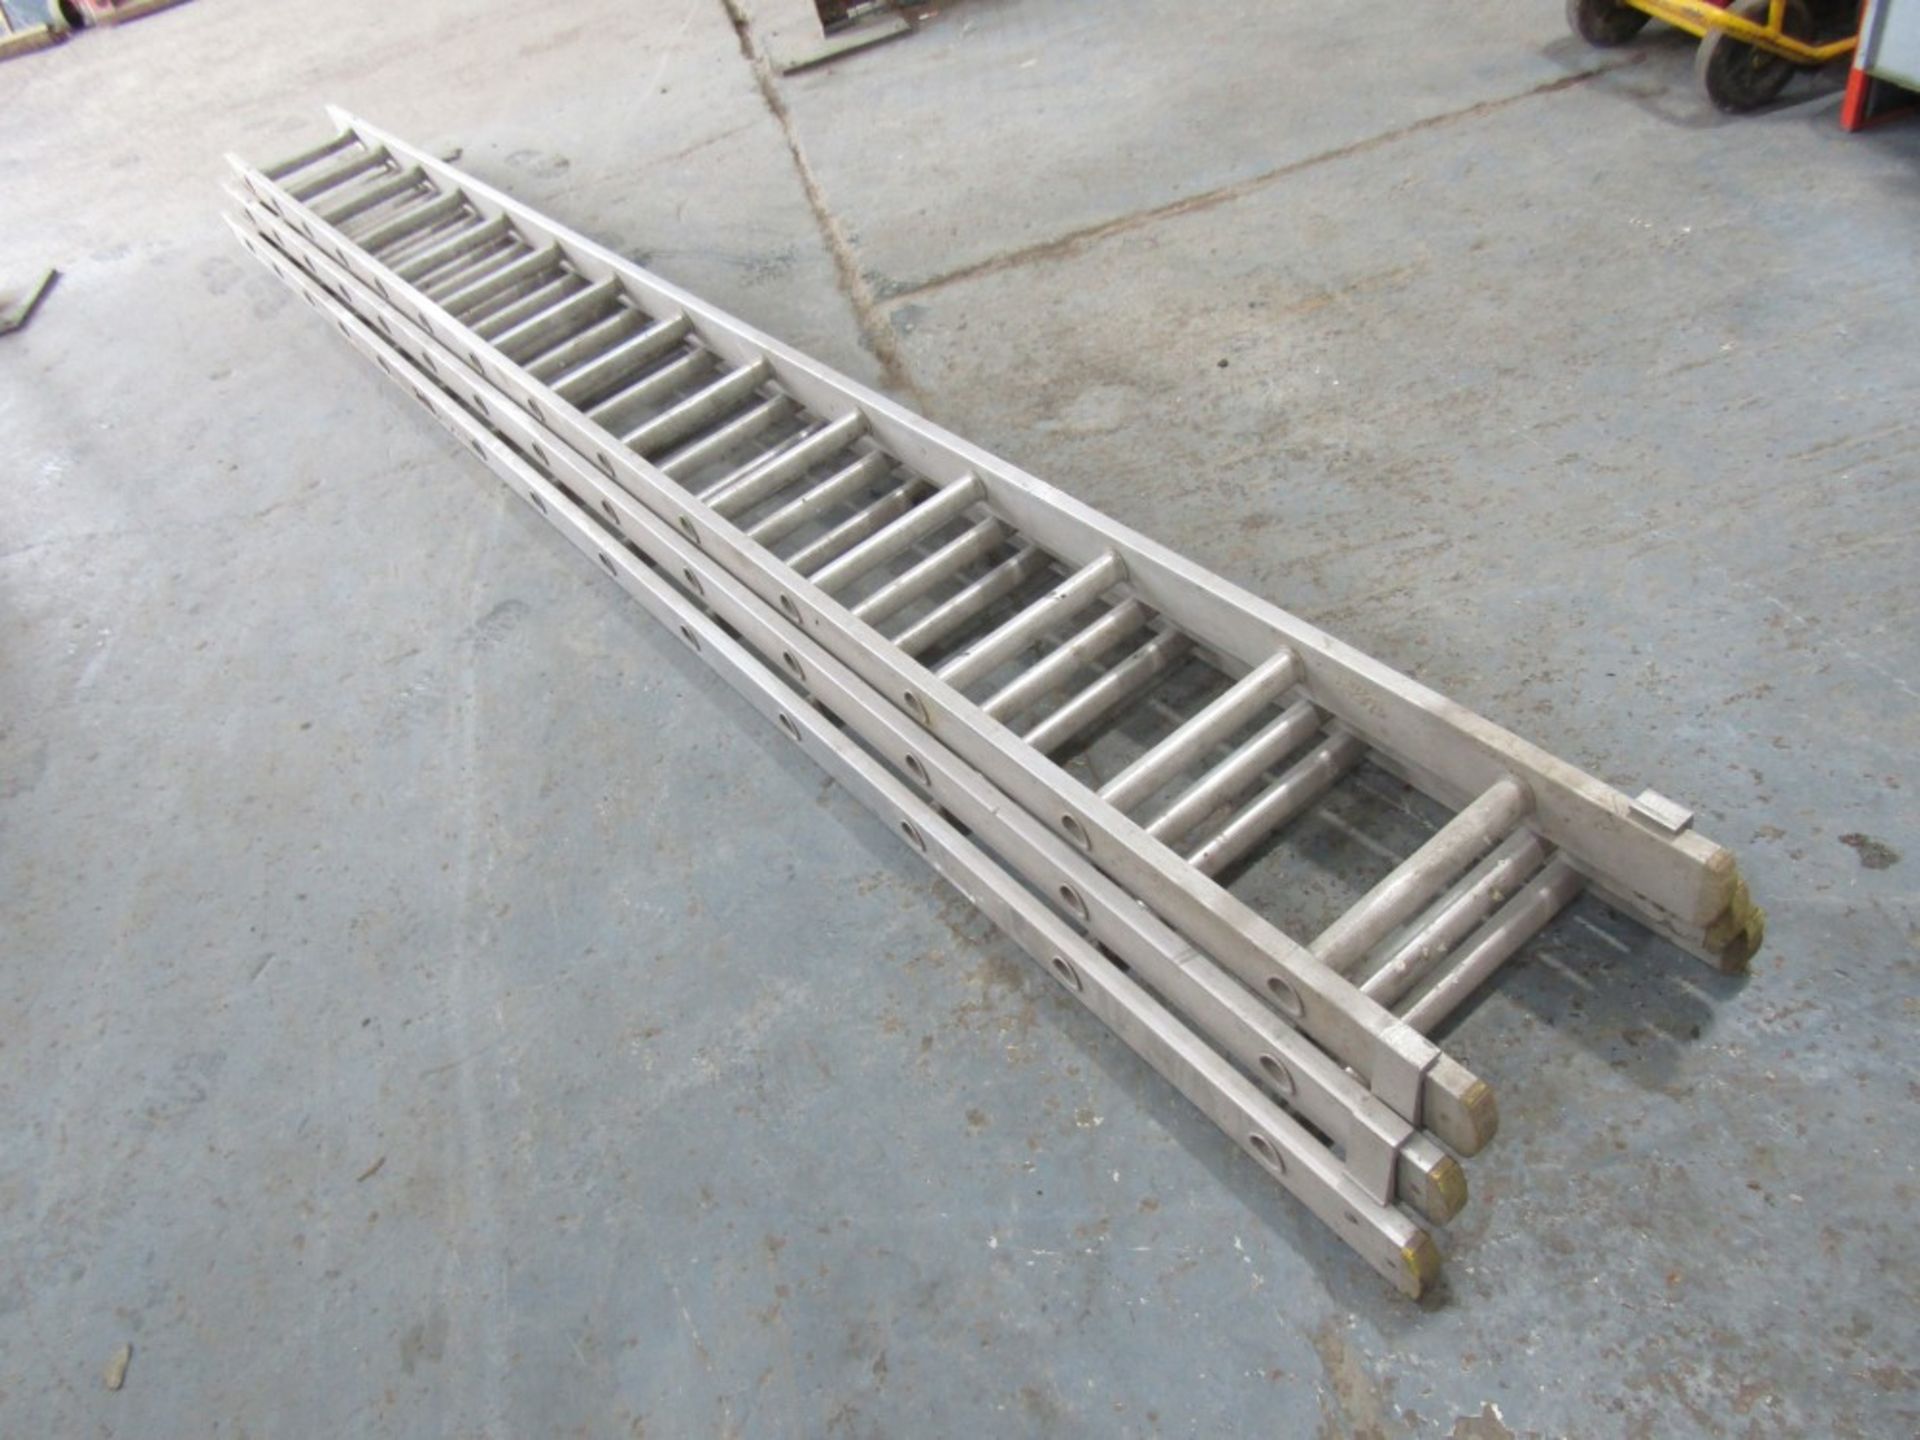 THREE SECTION ALLY LADDER - 12FT EACH SECTION [NO VAT]